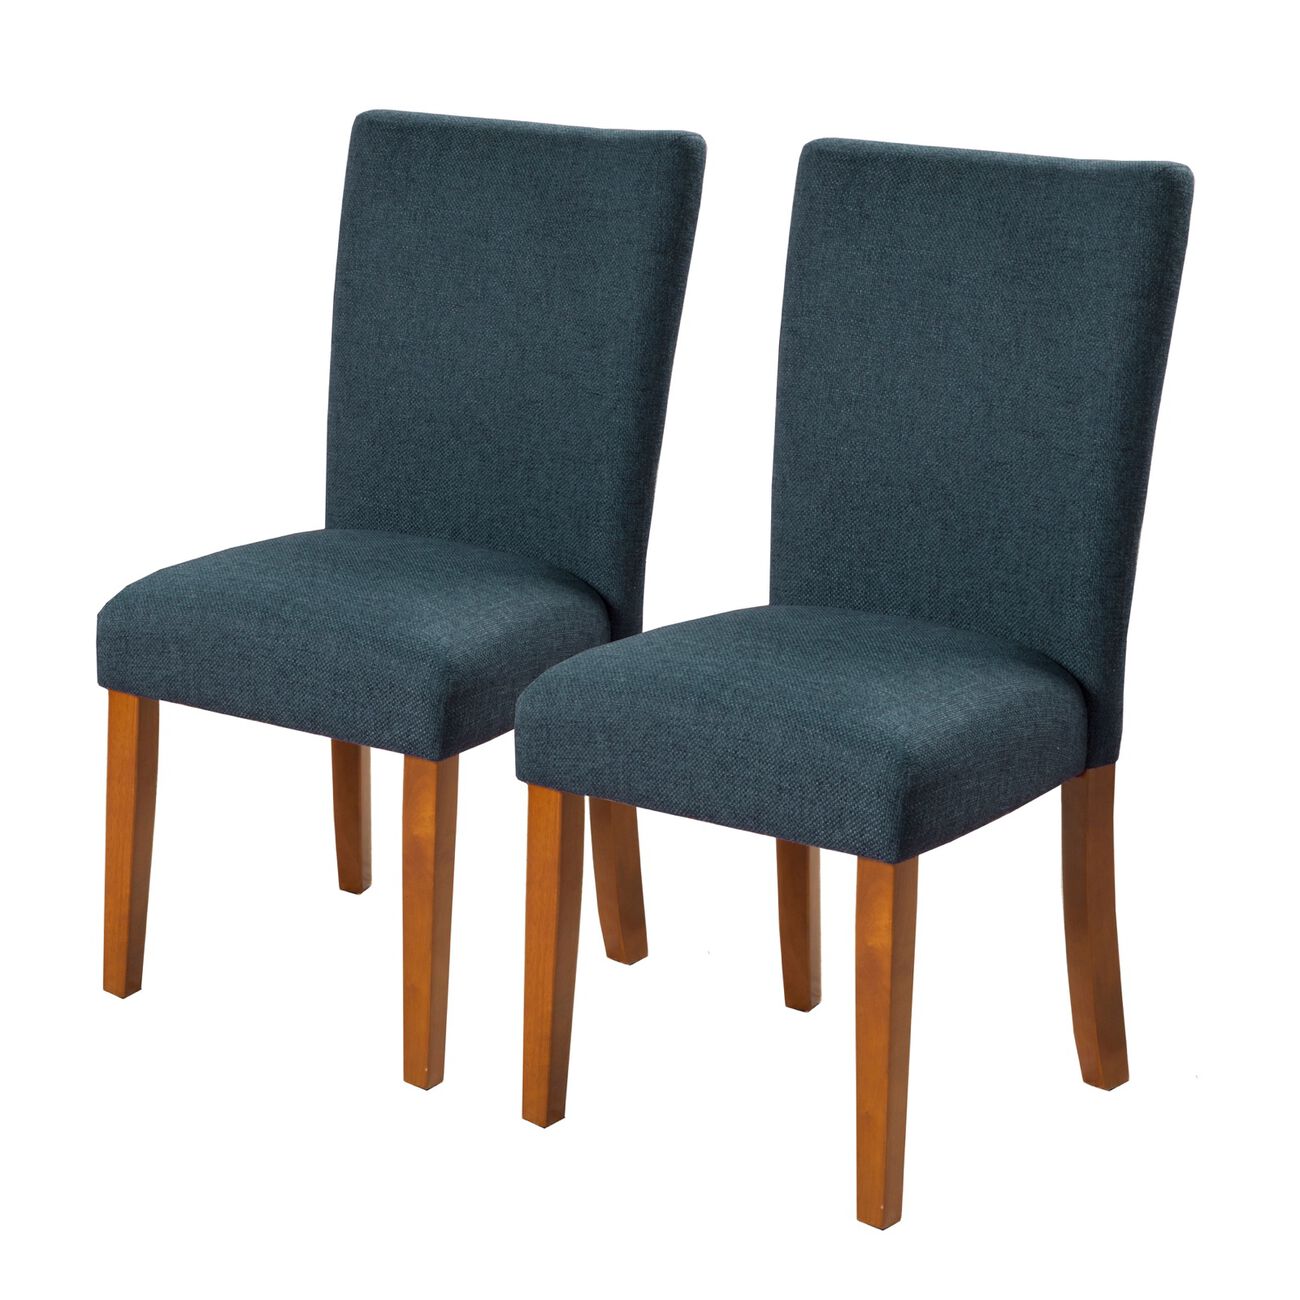 Fabric Upholstered Parson Dining Chair with Wooden Legs, Navy Blue and Brown, Set of Two